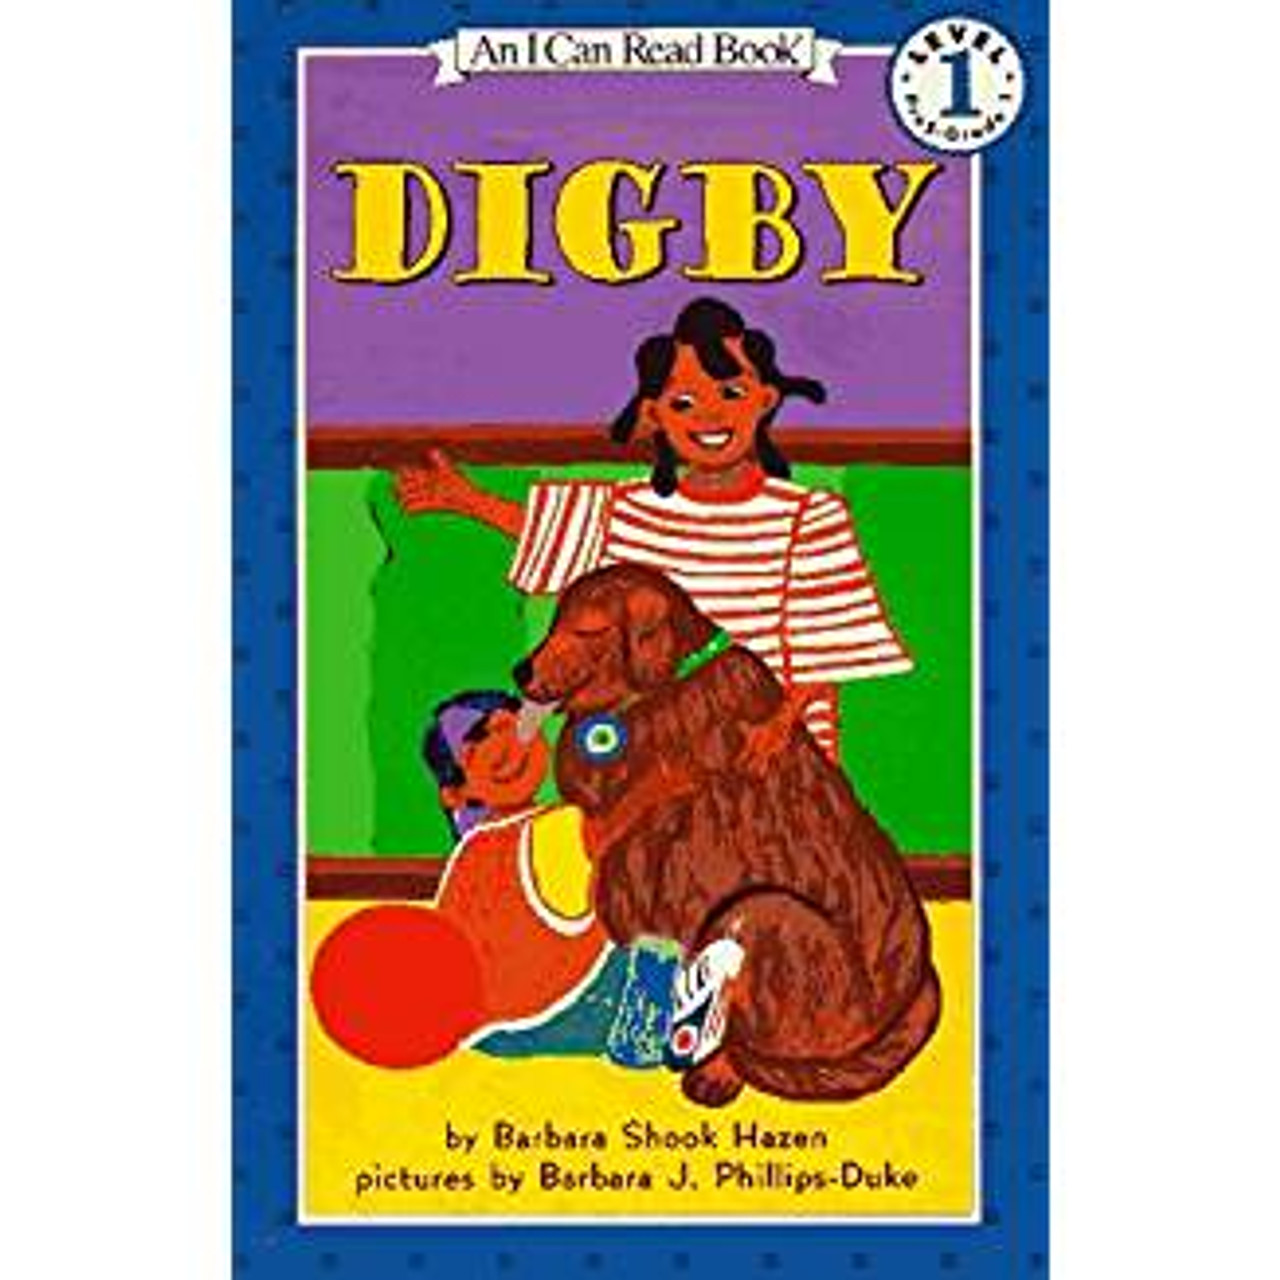 Digby is an old, faithful dog that can't run and play anymore. But she's still a faithful friend--she'll never be too old for that. Young readers will cherish this simple, endearing "I Can Read Book" about an aging pet. Full color.